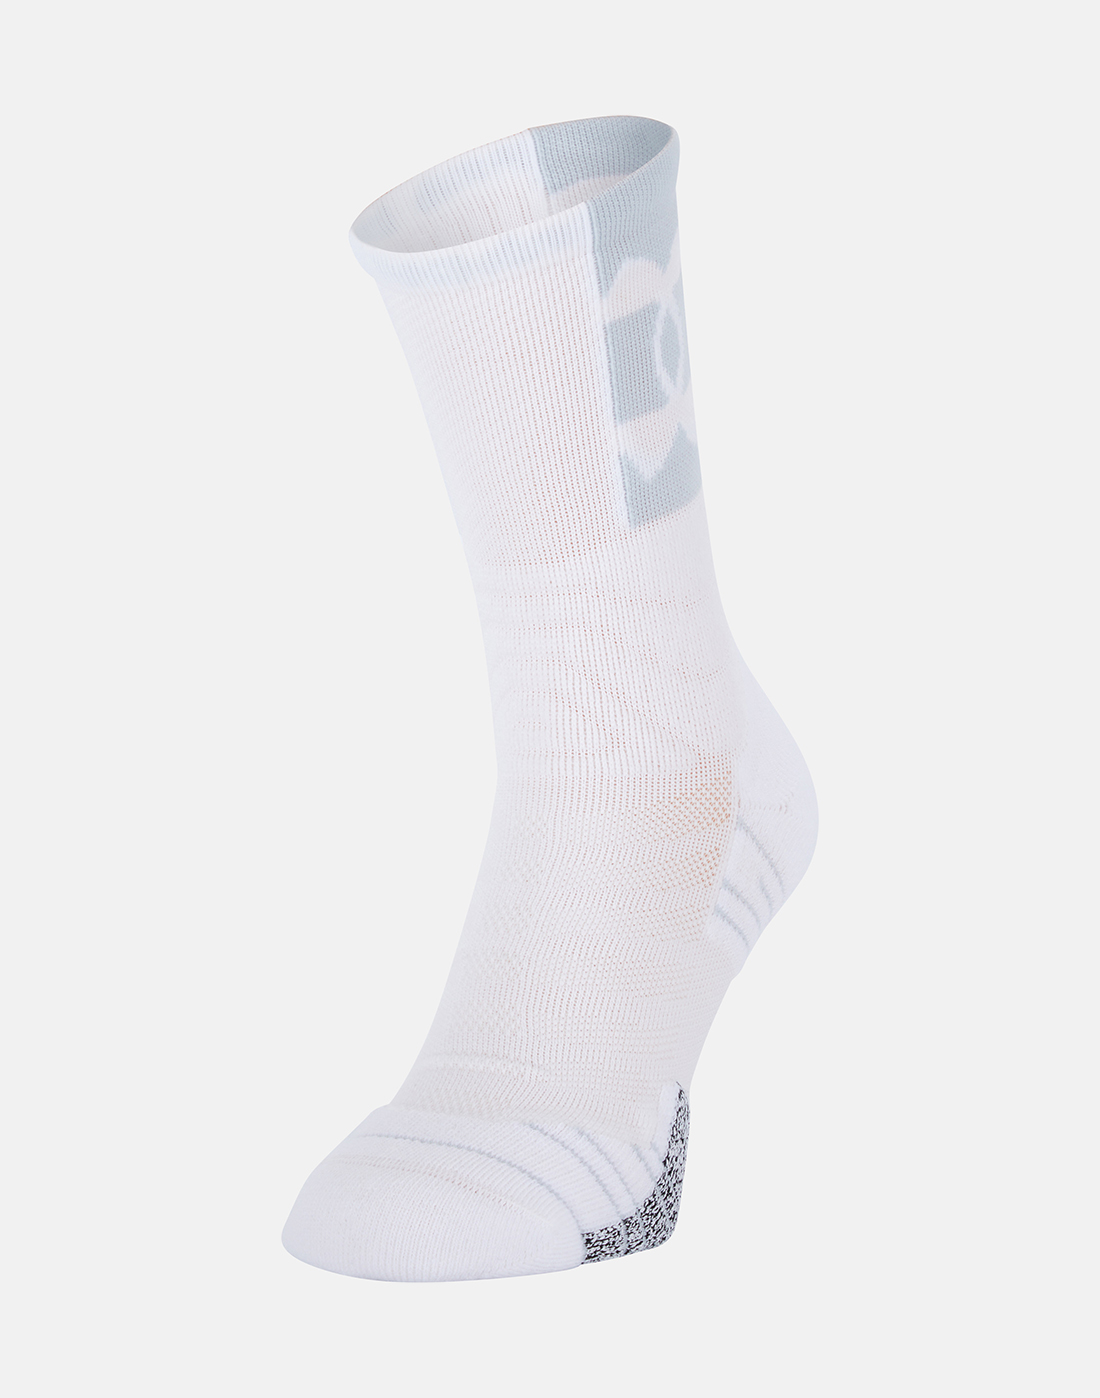 Under Armour Playtime Mid Crew Socks - White | Life Style Sports IE